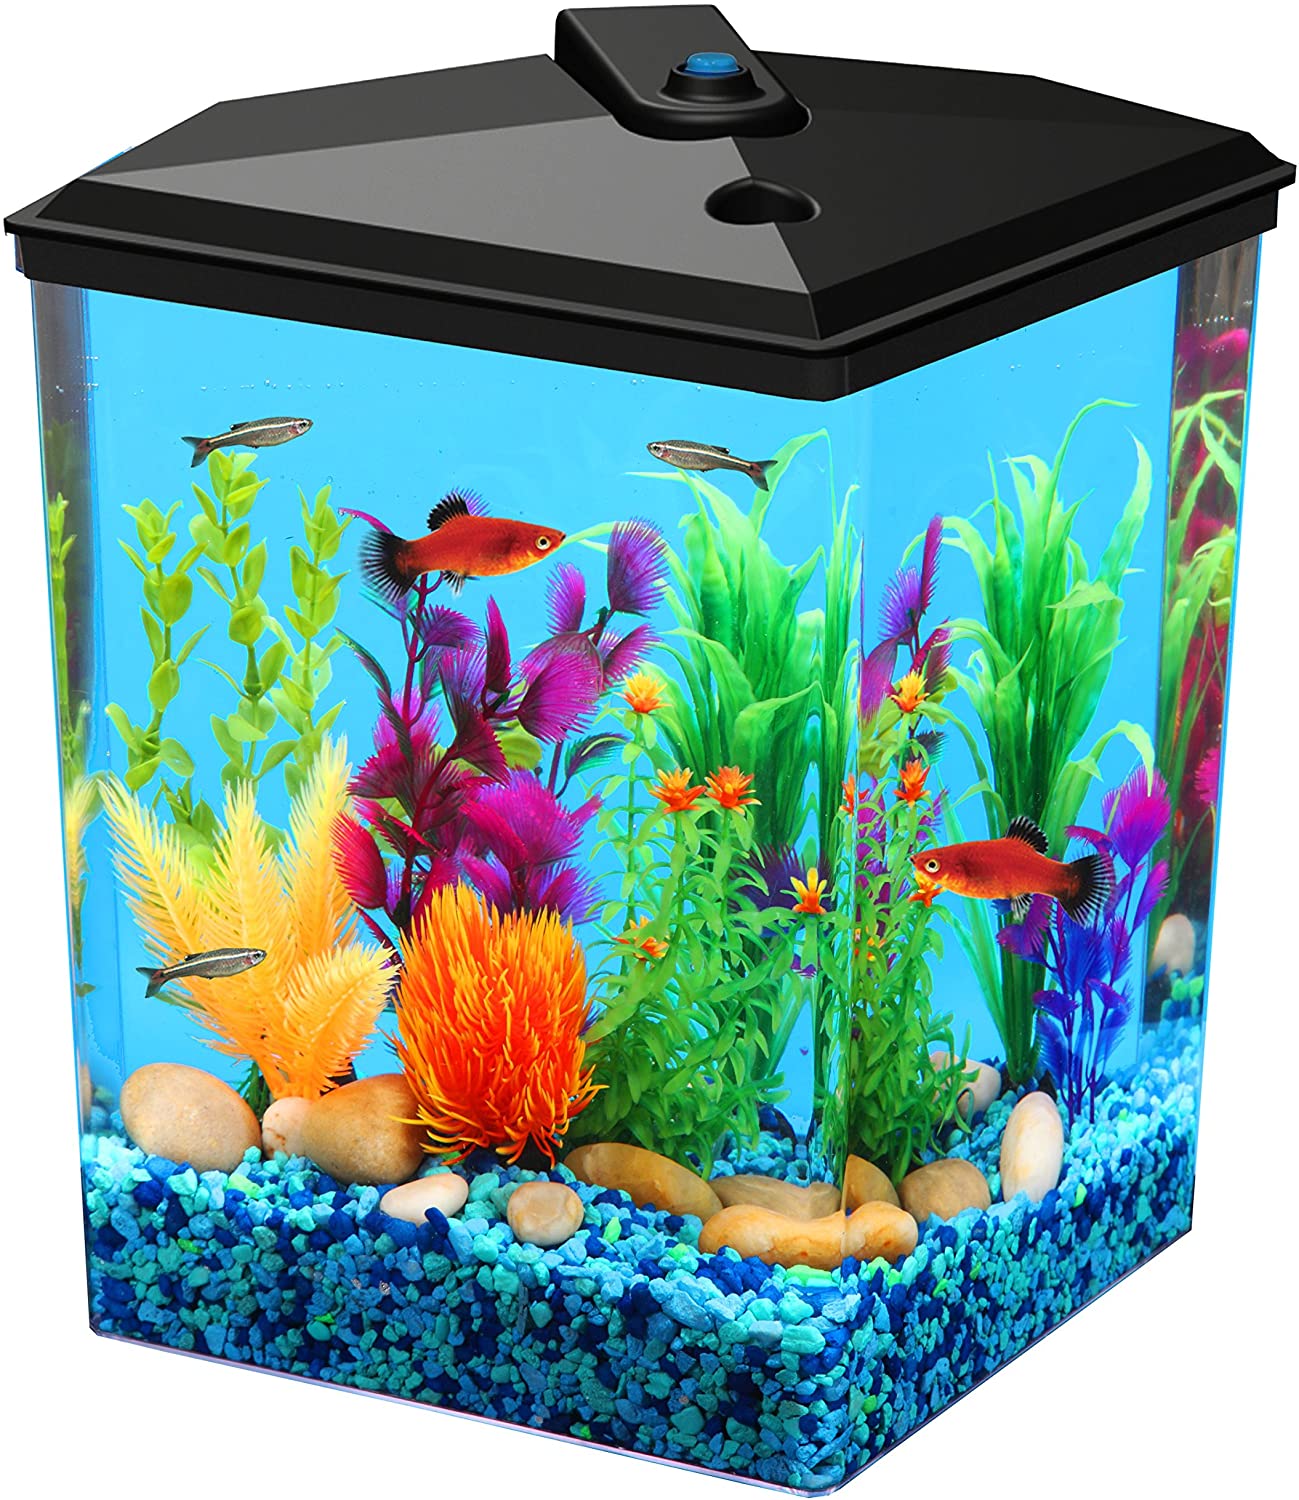 2.5 Gallon Fish Tanks - Options and Reviews 2022 | A Little Bit Fishy